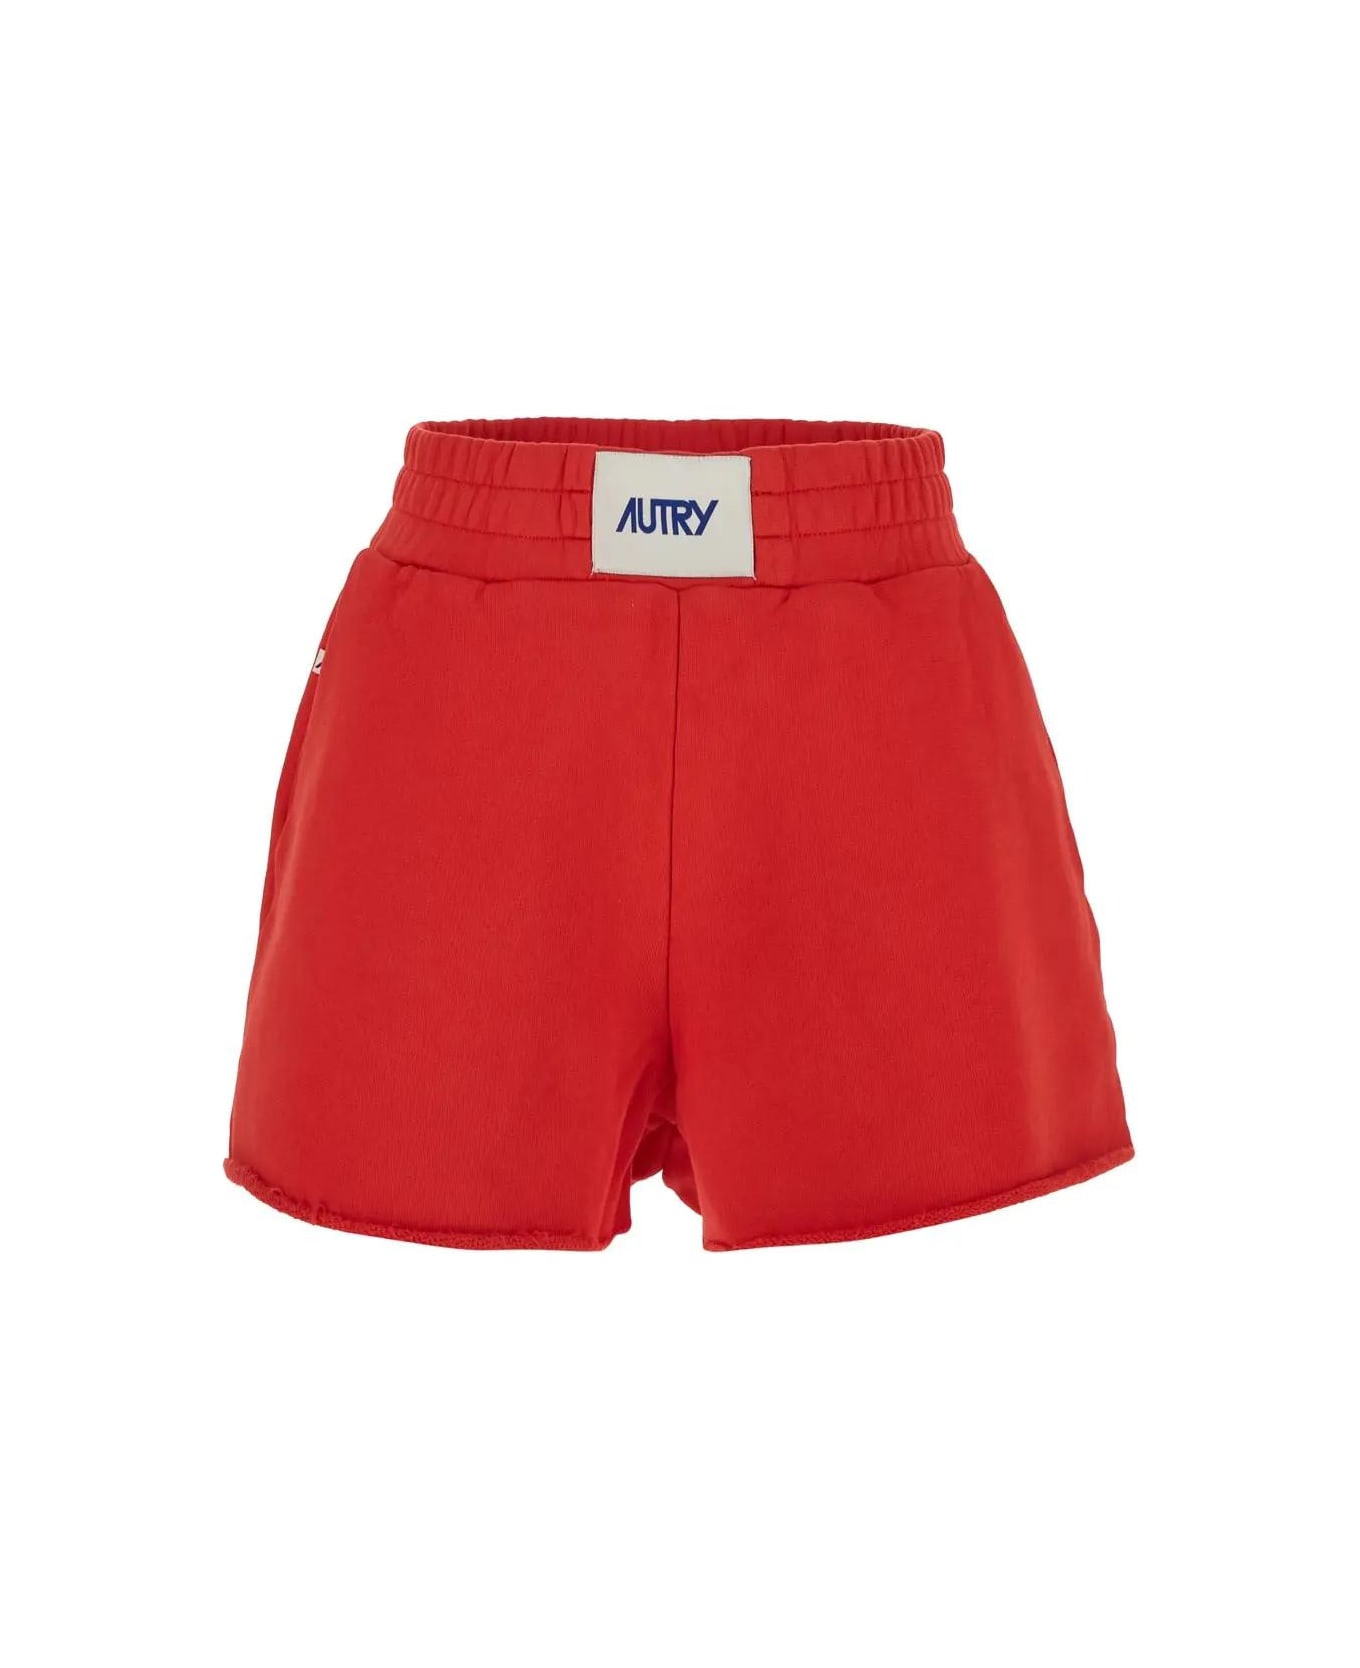 Autry Red Short Pants - APPAREL RED